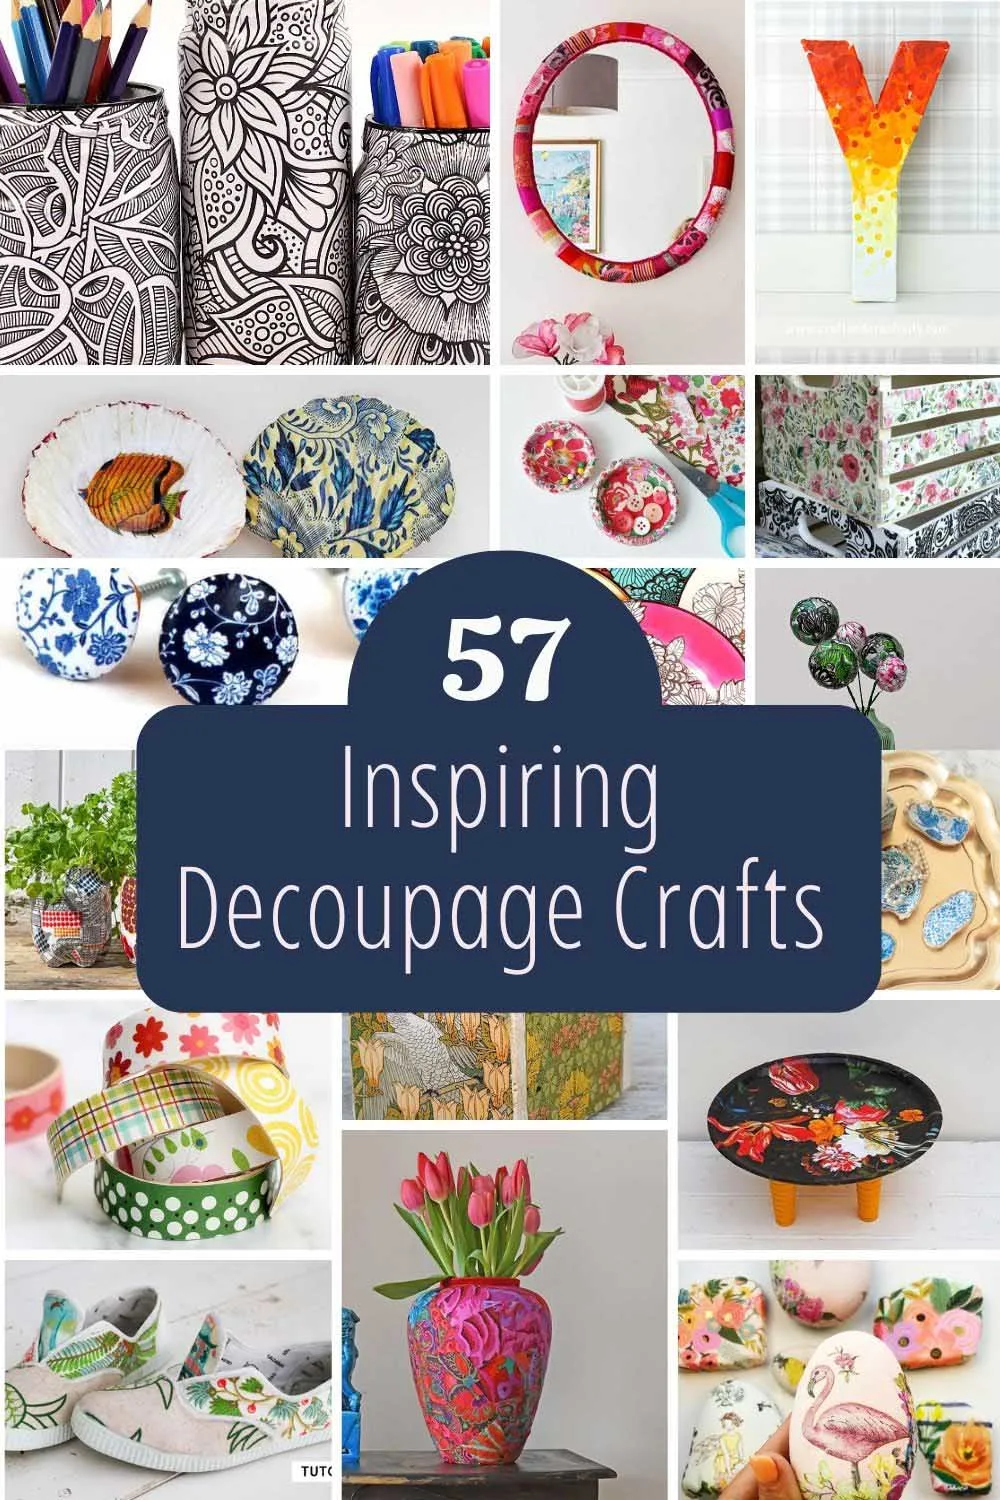 How To Easily Print On Tissue Paper For Stunning Decoupage Crafts - My  Humble Home and Garden